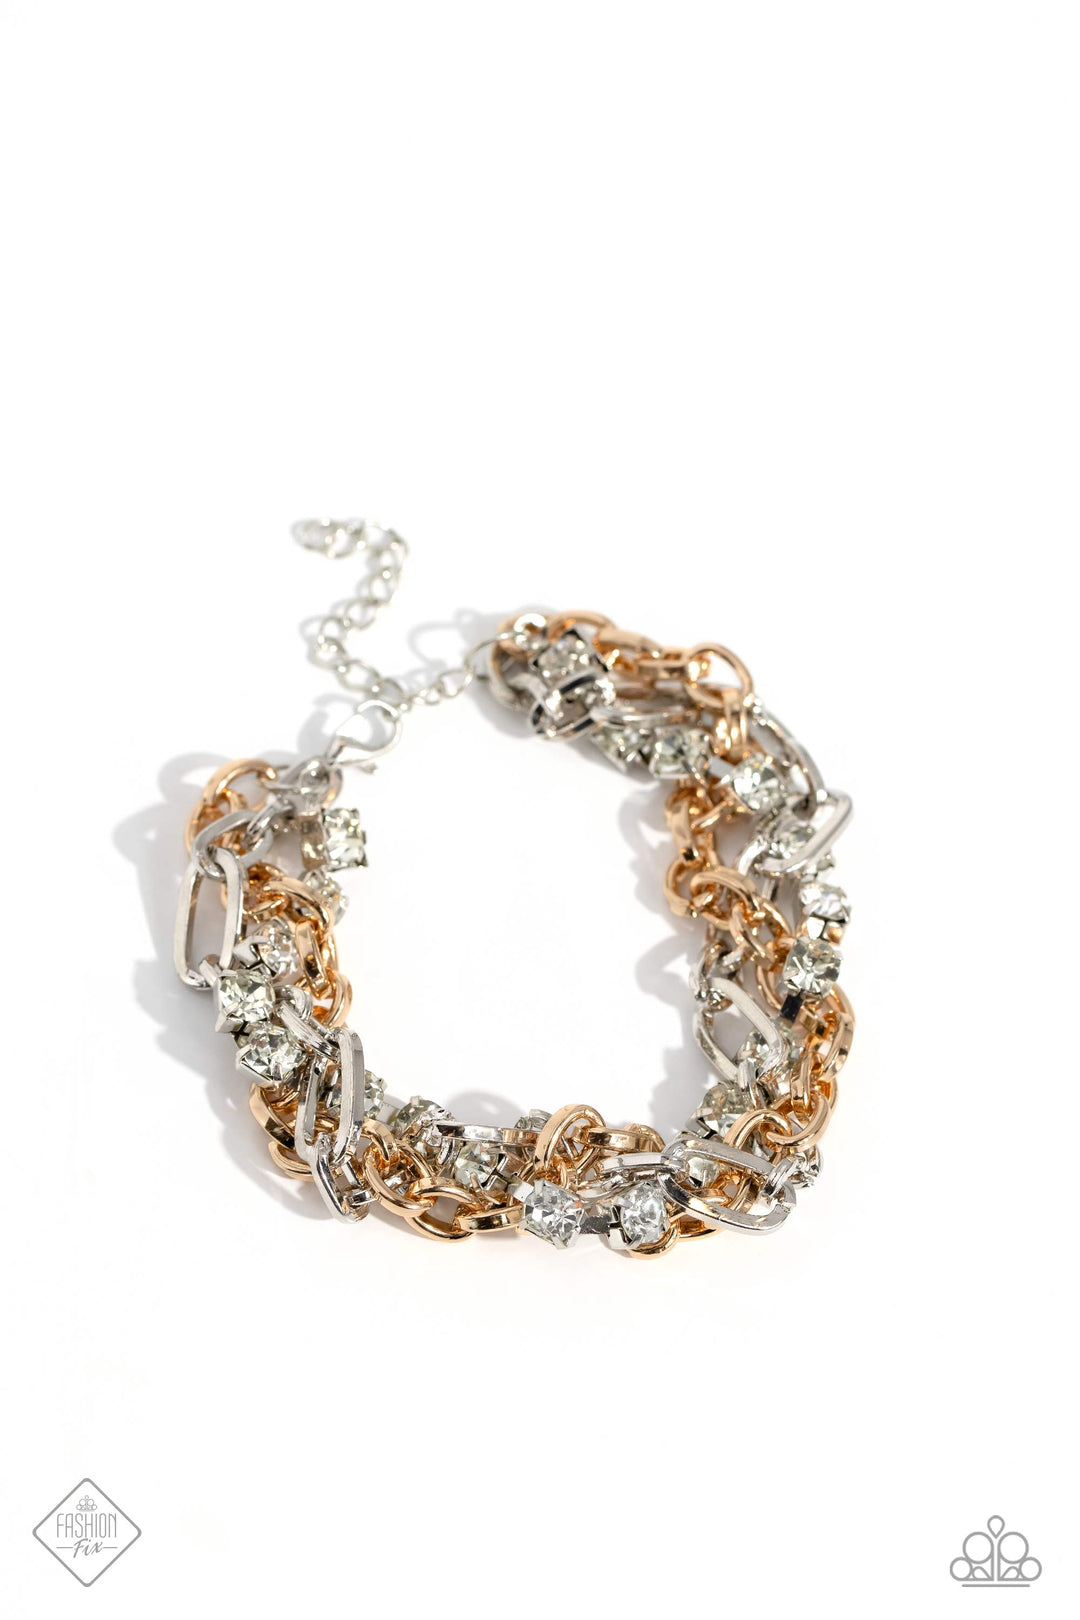 Two-Tone Taste - Multi Metal Bracelet - Paparazzi Accessories - Mismatched strands of glistening gold and silver oval links are intertwined with a row of sparkling, square-cut, white rhinestones encased in sleek silver fittings, resulting in a twisted collision of grit and glamour around the wrist.